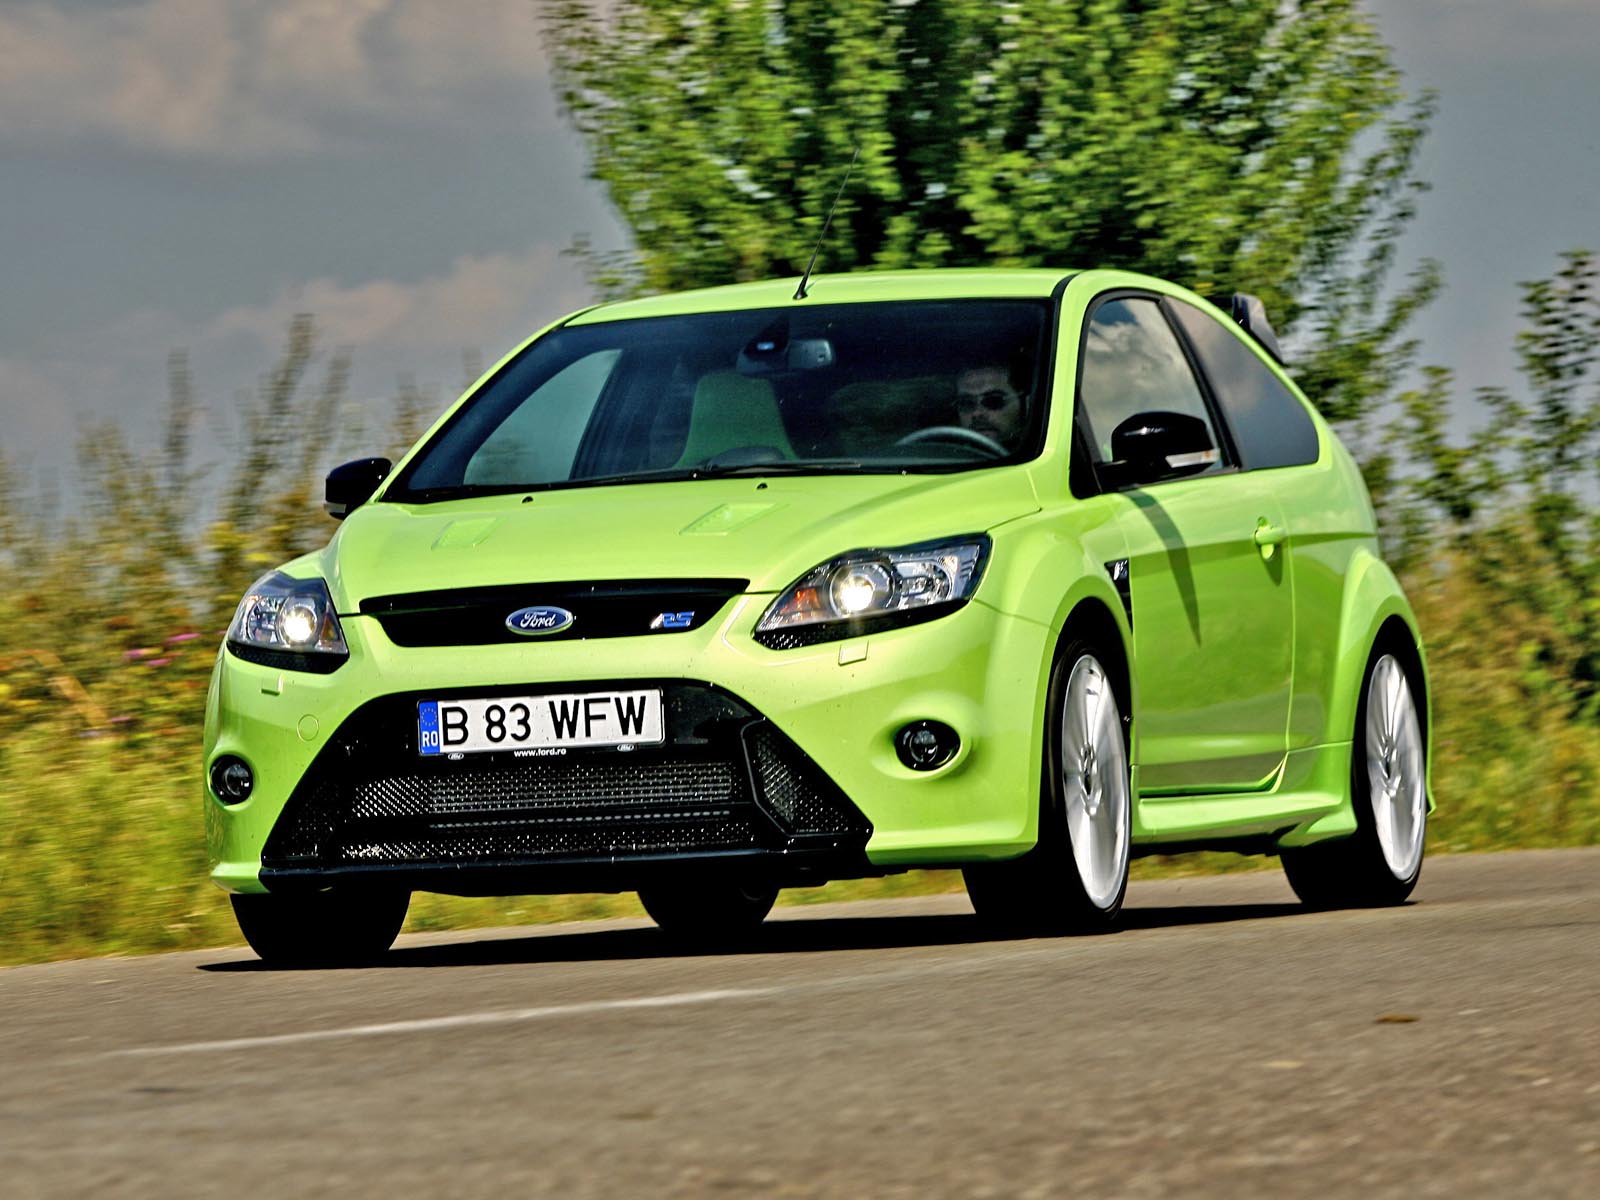 Focus RS, the real thing